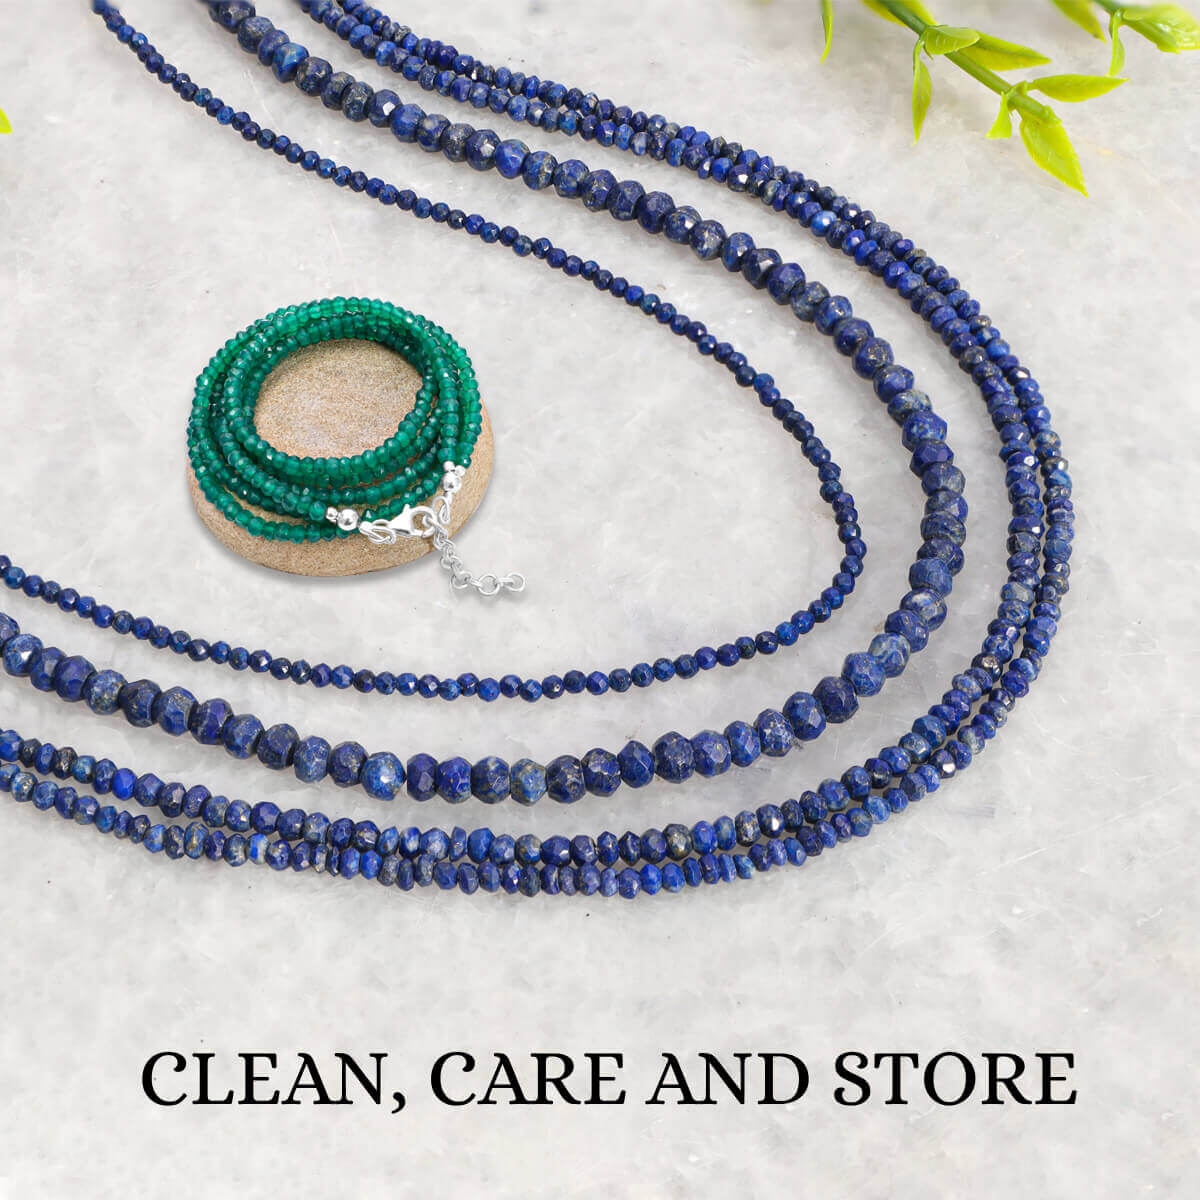 How To Take Care and Clean Gemstone Beads Jewelry